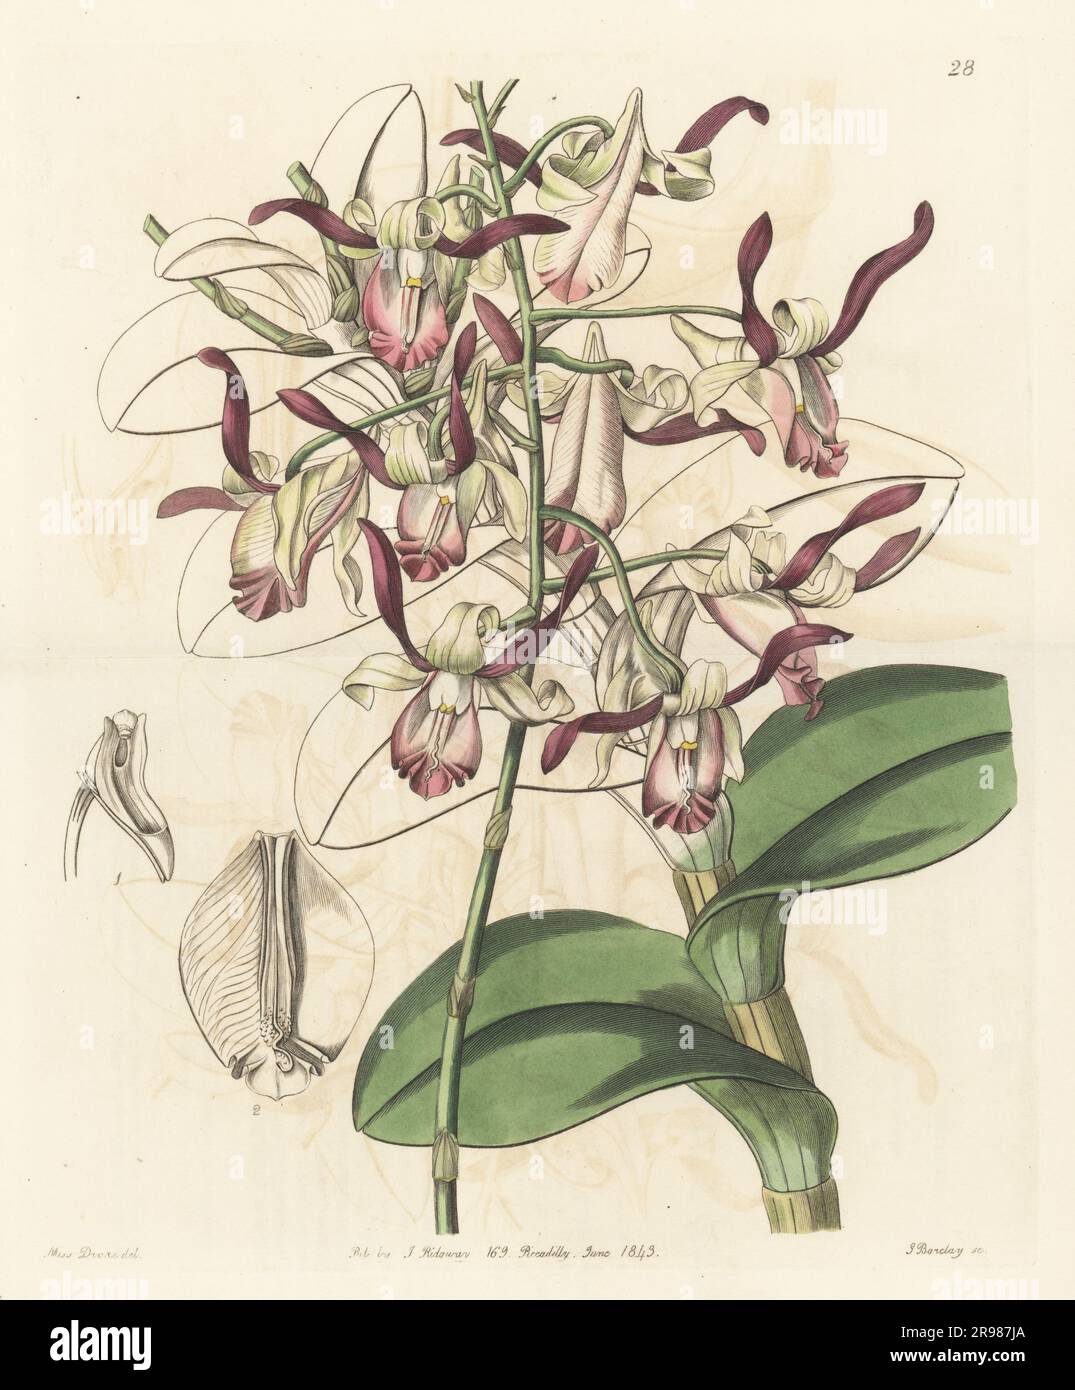 Bull orchid or bull-headed dendrobium, Dendrobium taurinum. Native to the Philippines and Indonesia. Sent to nurseryman George Loddiges by plant hunter Hugh Cuming from Manila. Handcoloured copperplate engraving by George Barclay after a botanical illustration by Sarah Drake from Edwards’ Botanical Register, continued by John Lindley, published by James Ridgway, London, 1843. Stock Photo